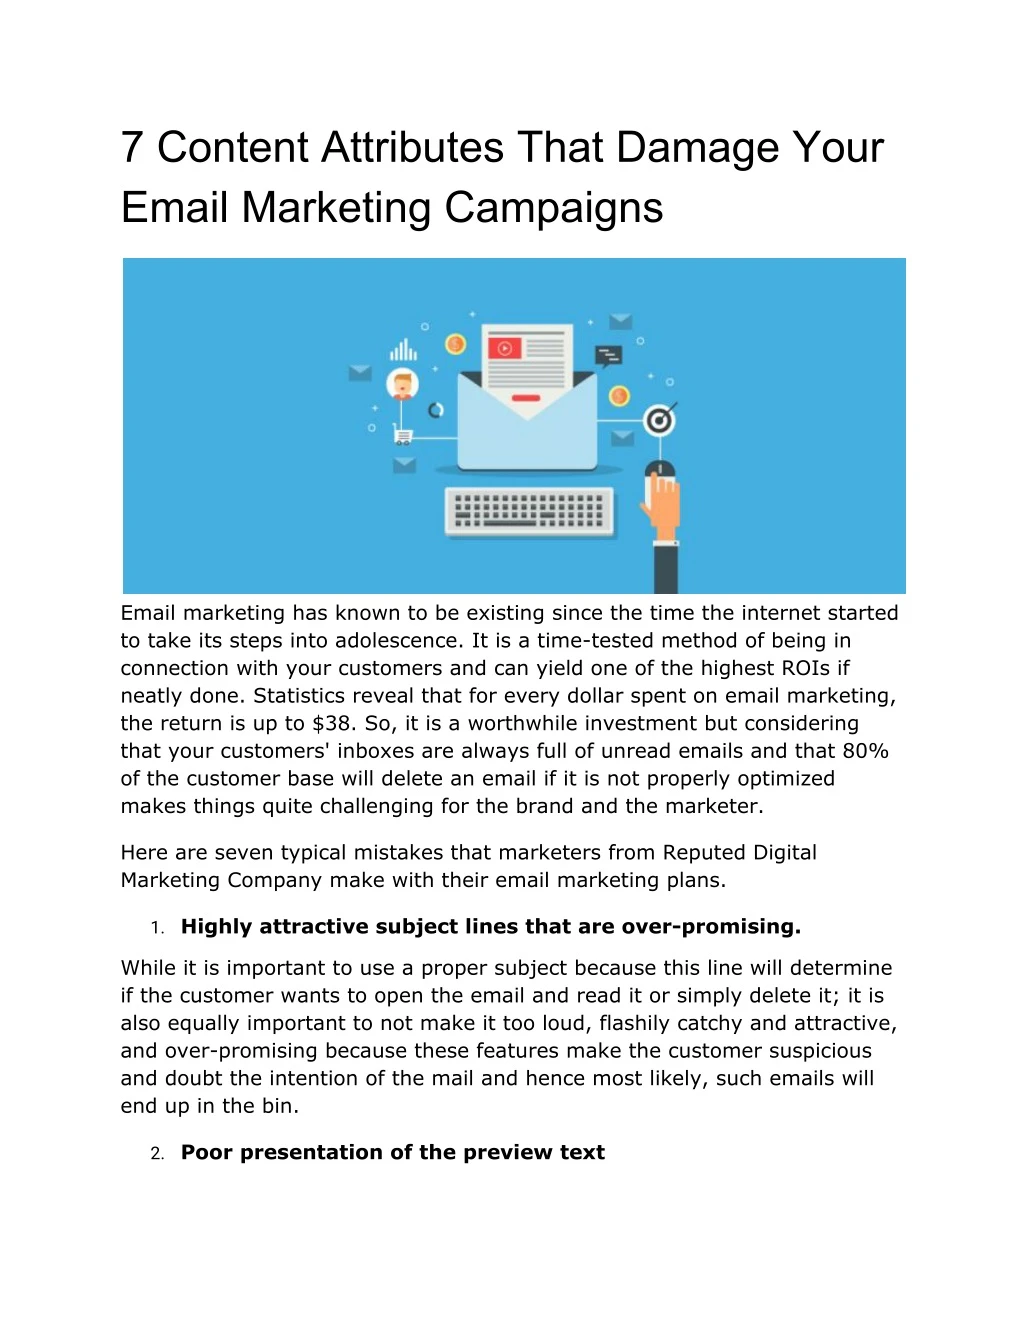 7 content attributes that damage your email